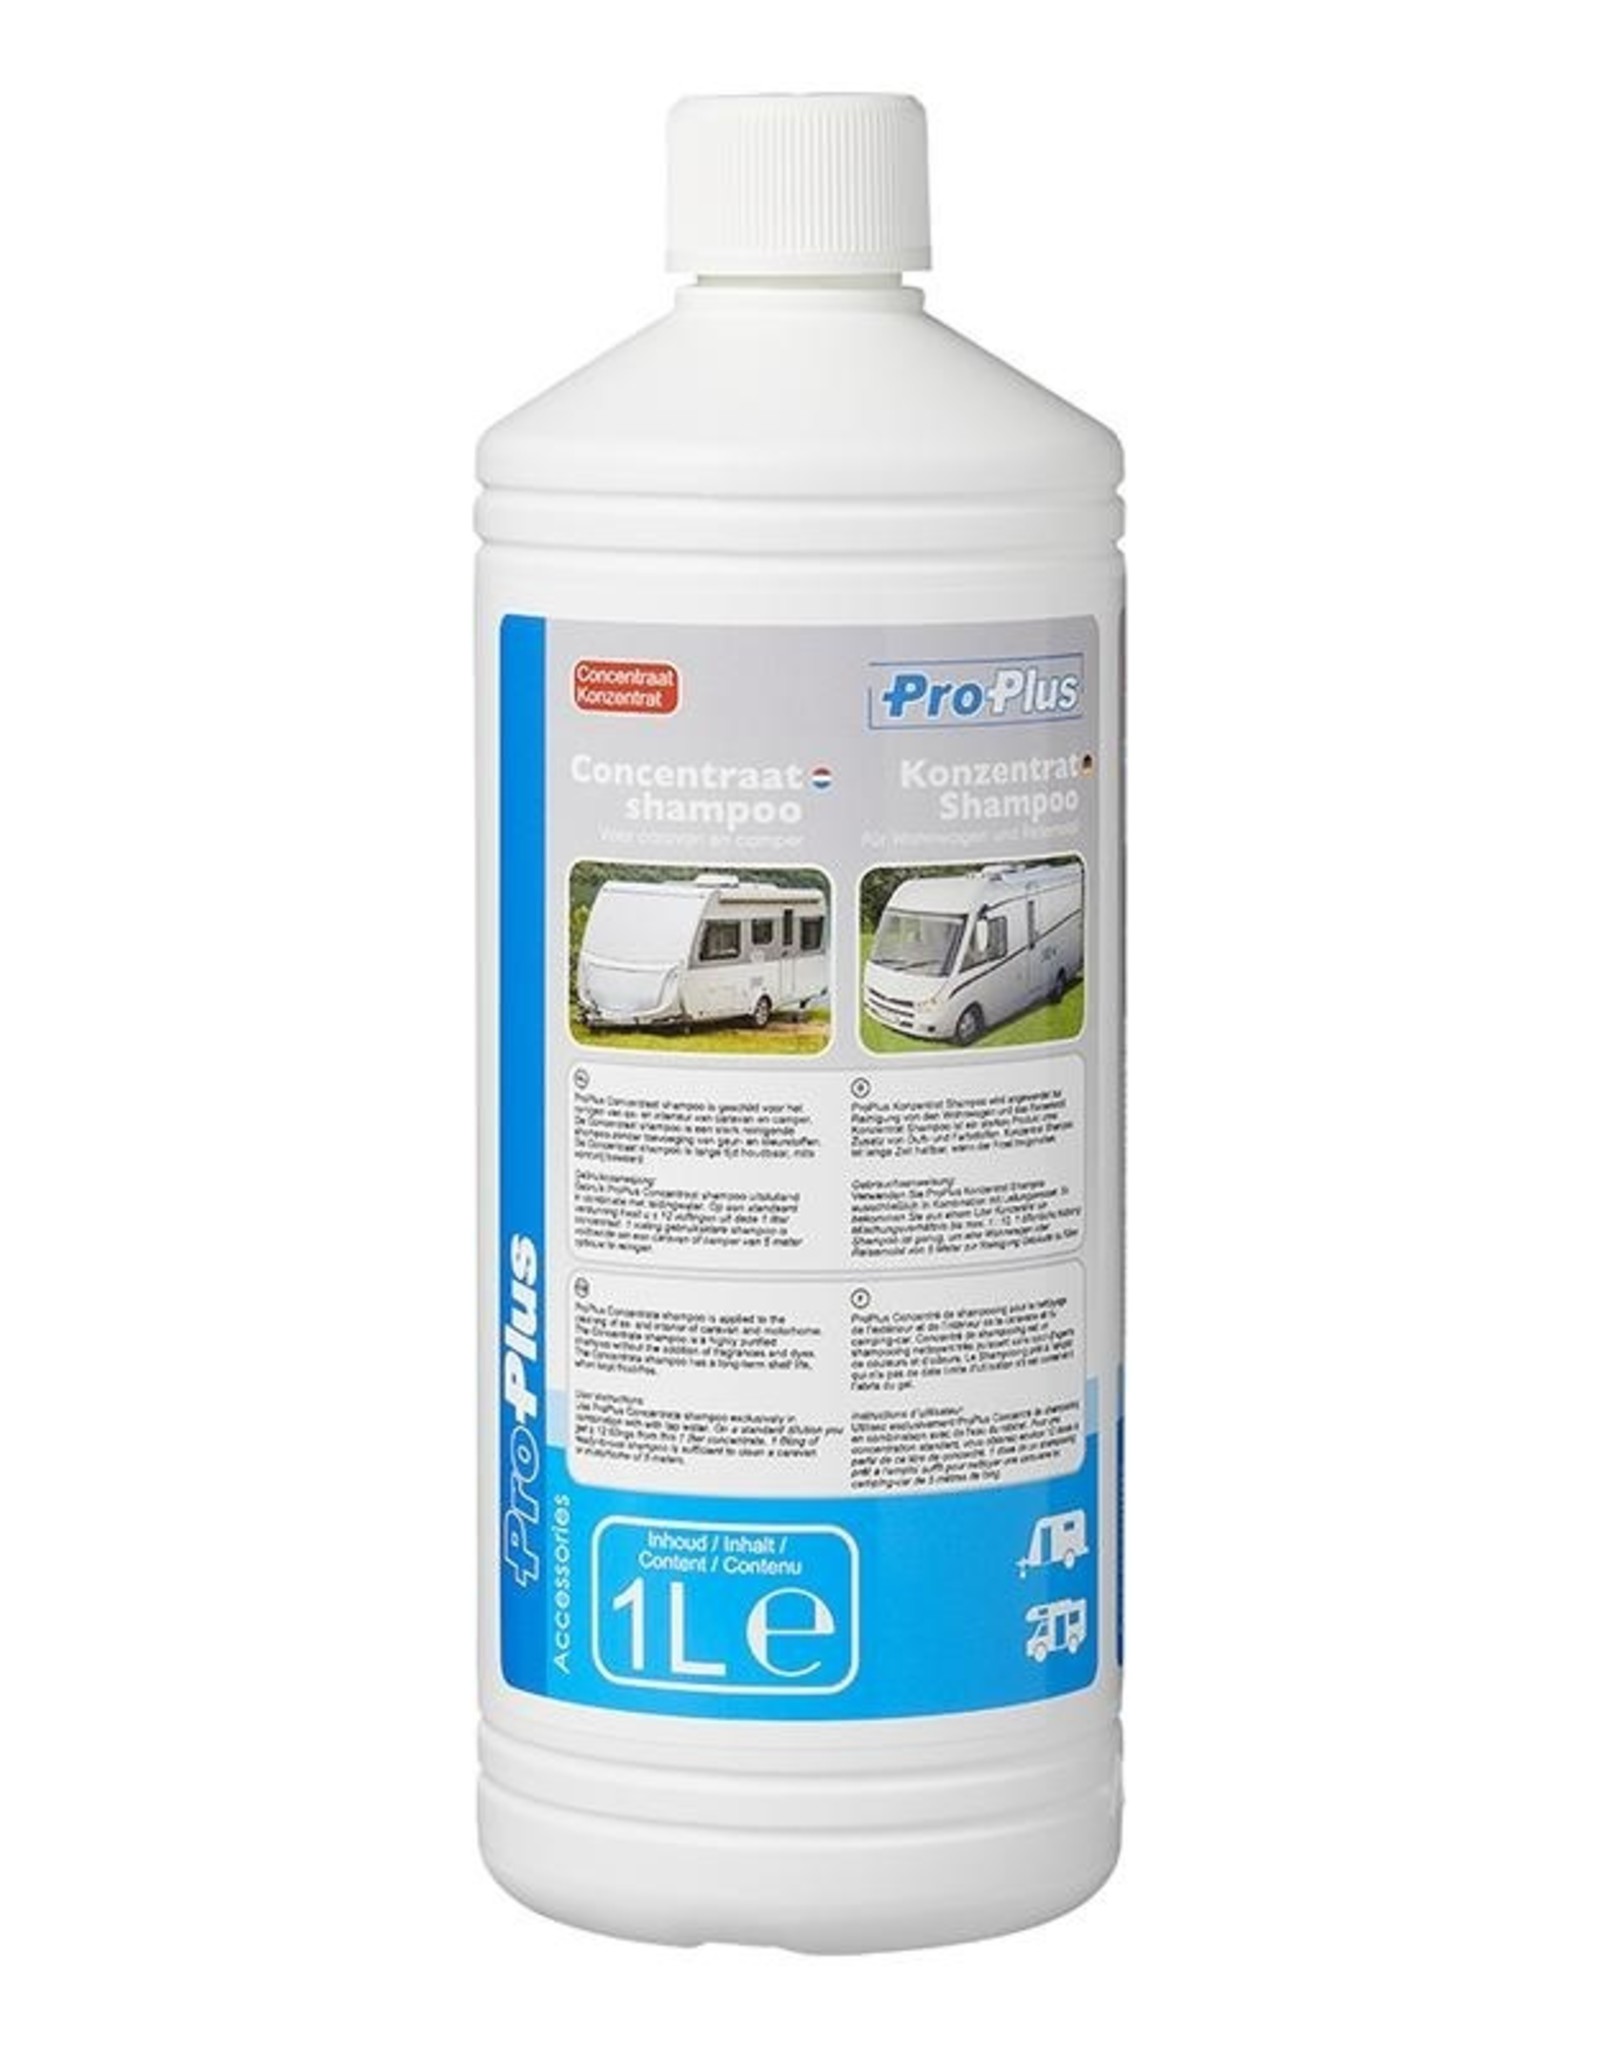 Pro-Plus Pro Plus Shampoo concentrate 1 liter for caravan and motorhome